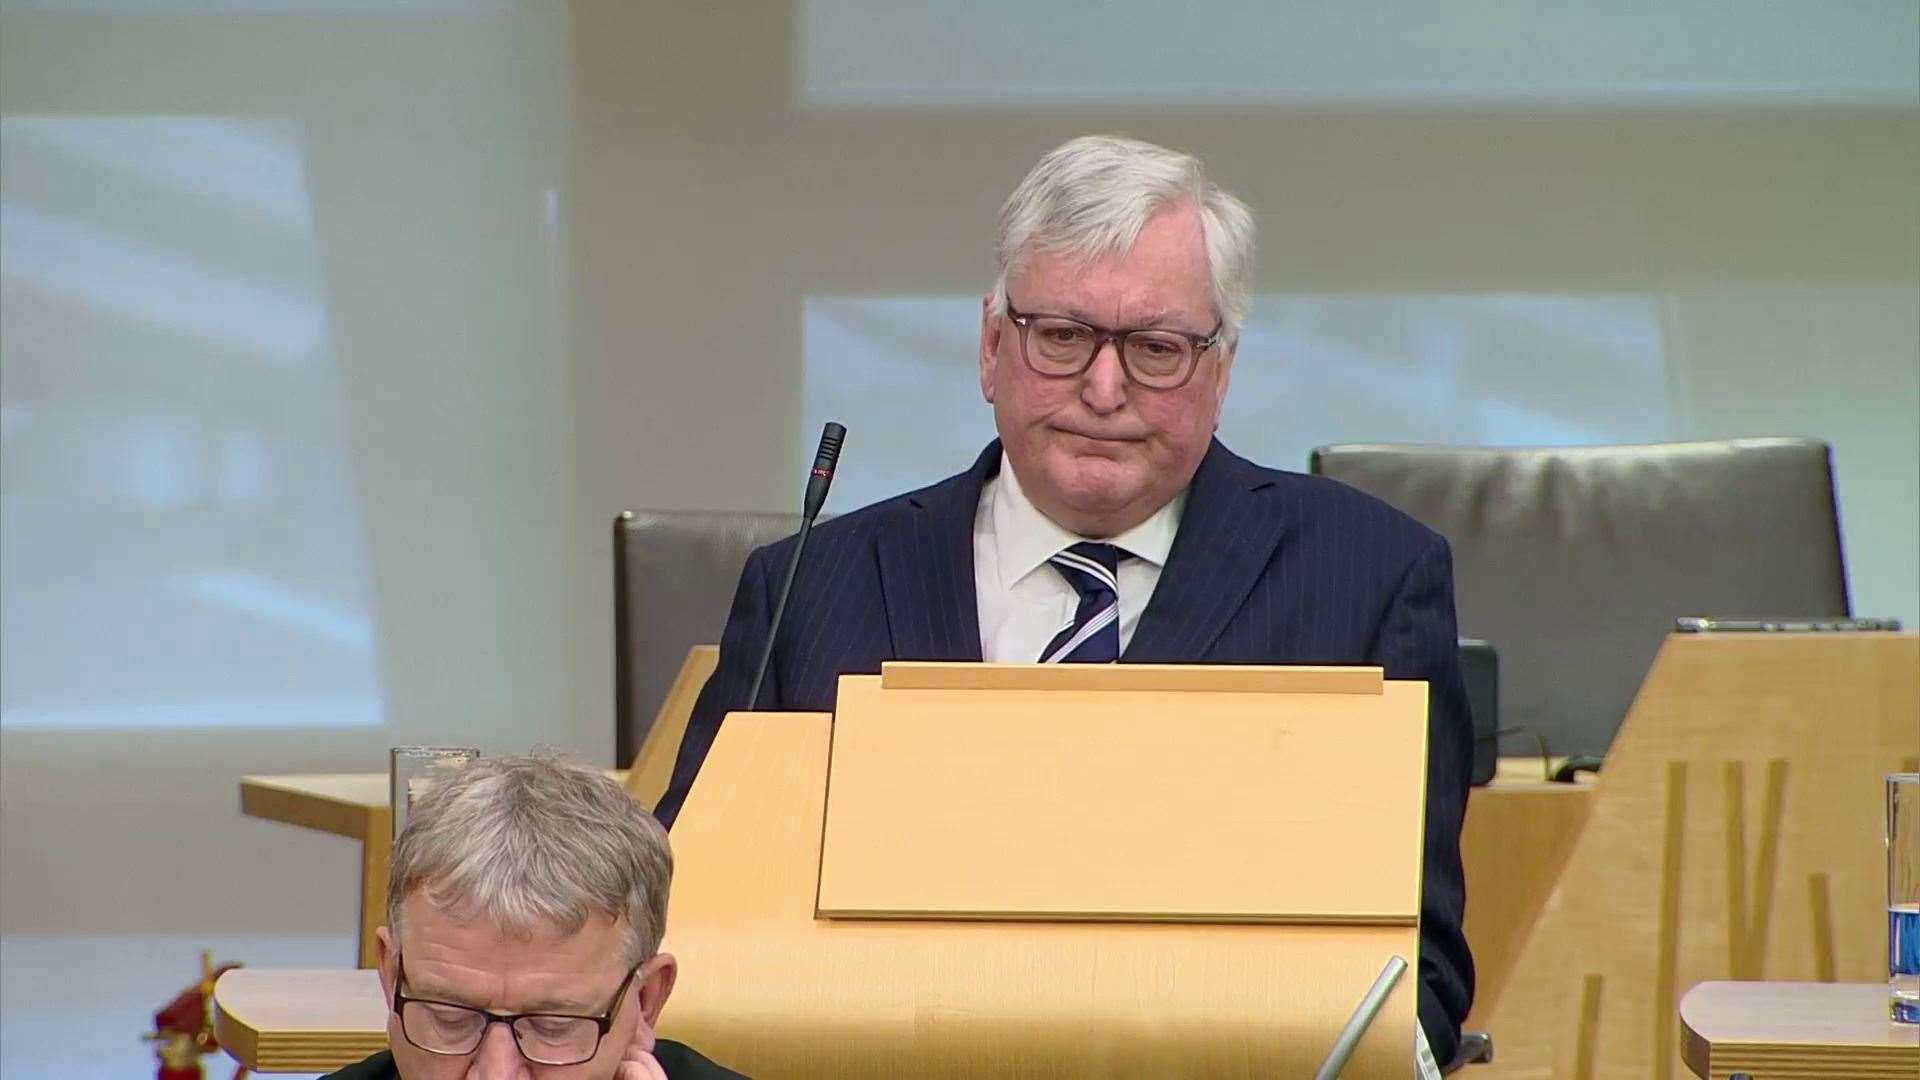 MSP Fergus Ewing did not appear convinced by Deputy First Minister Shona Robison's response.